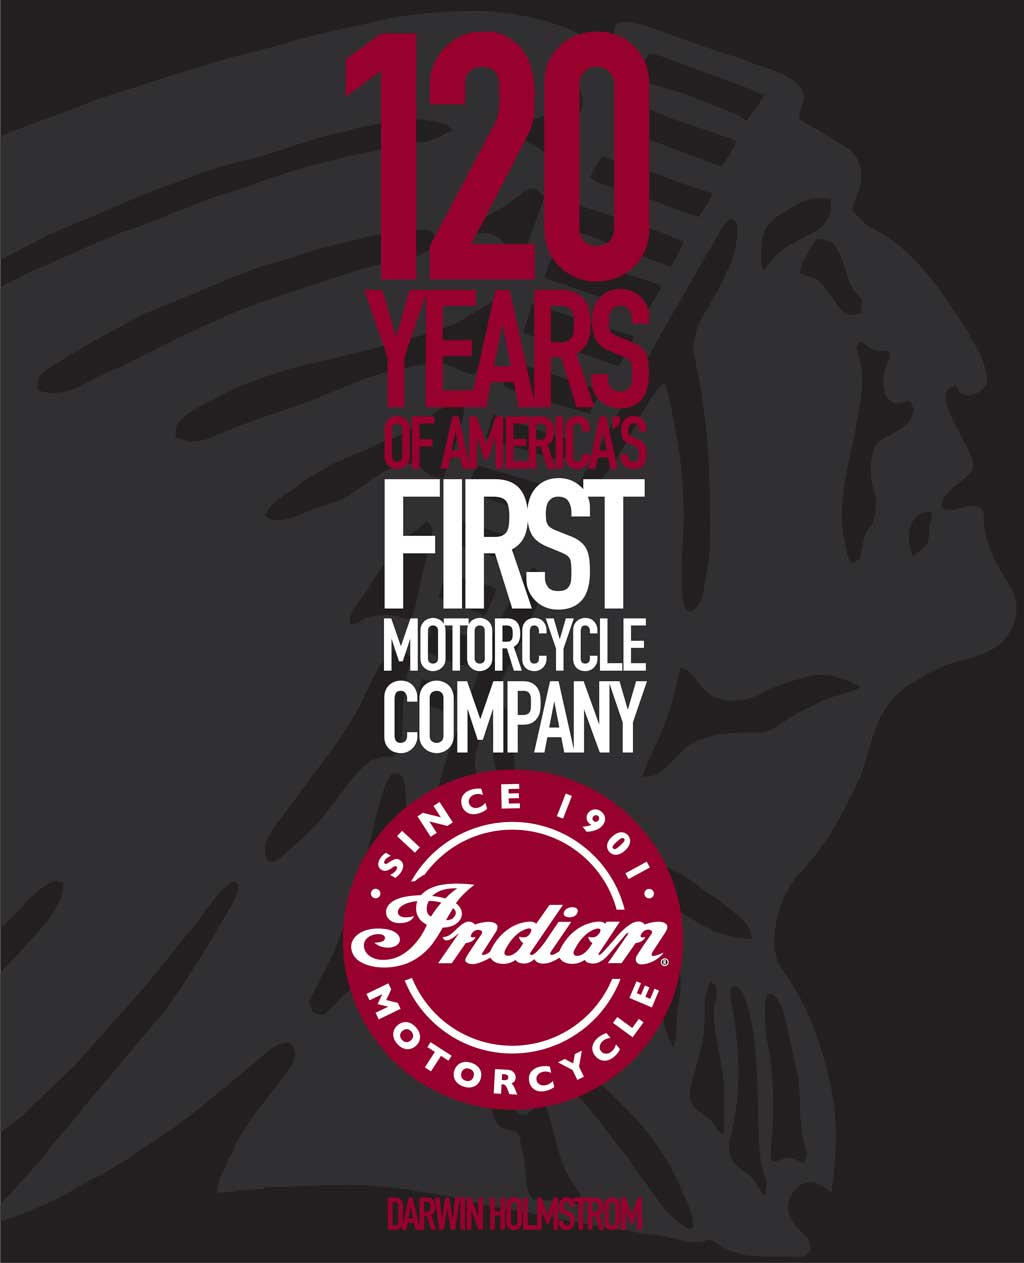 Indian Motorcycle: 120 years of America’s first motorcycle maker